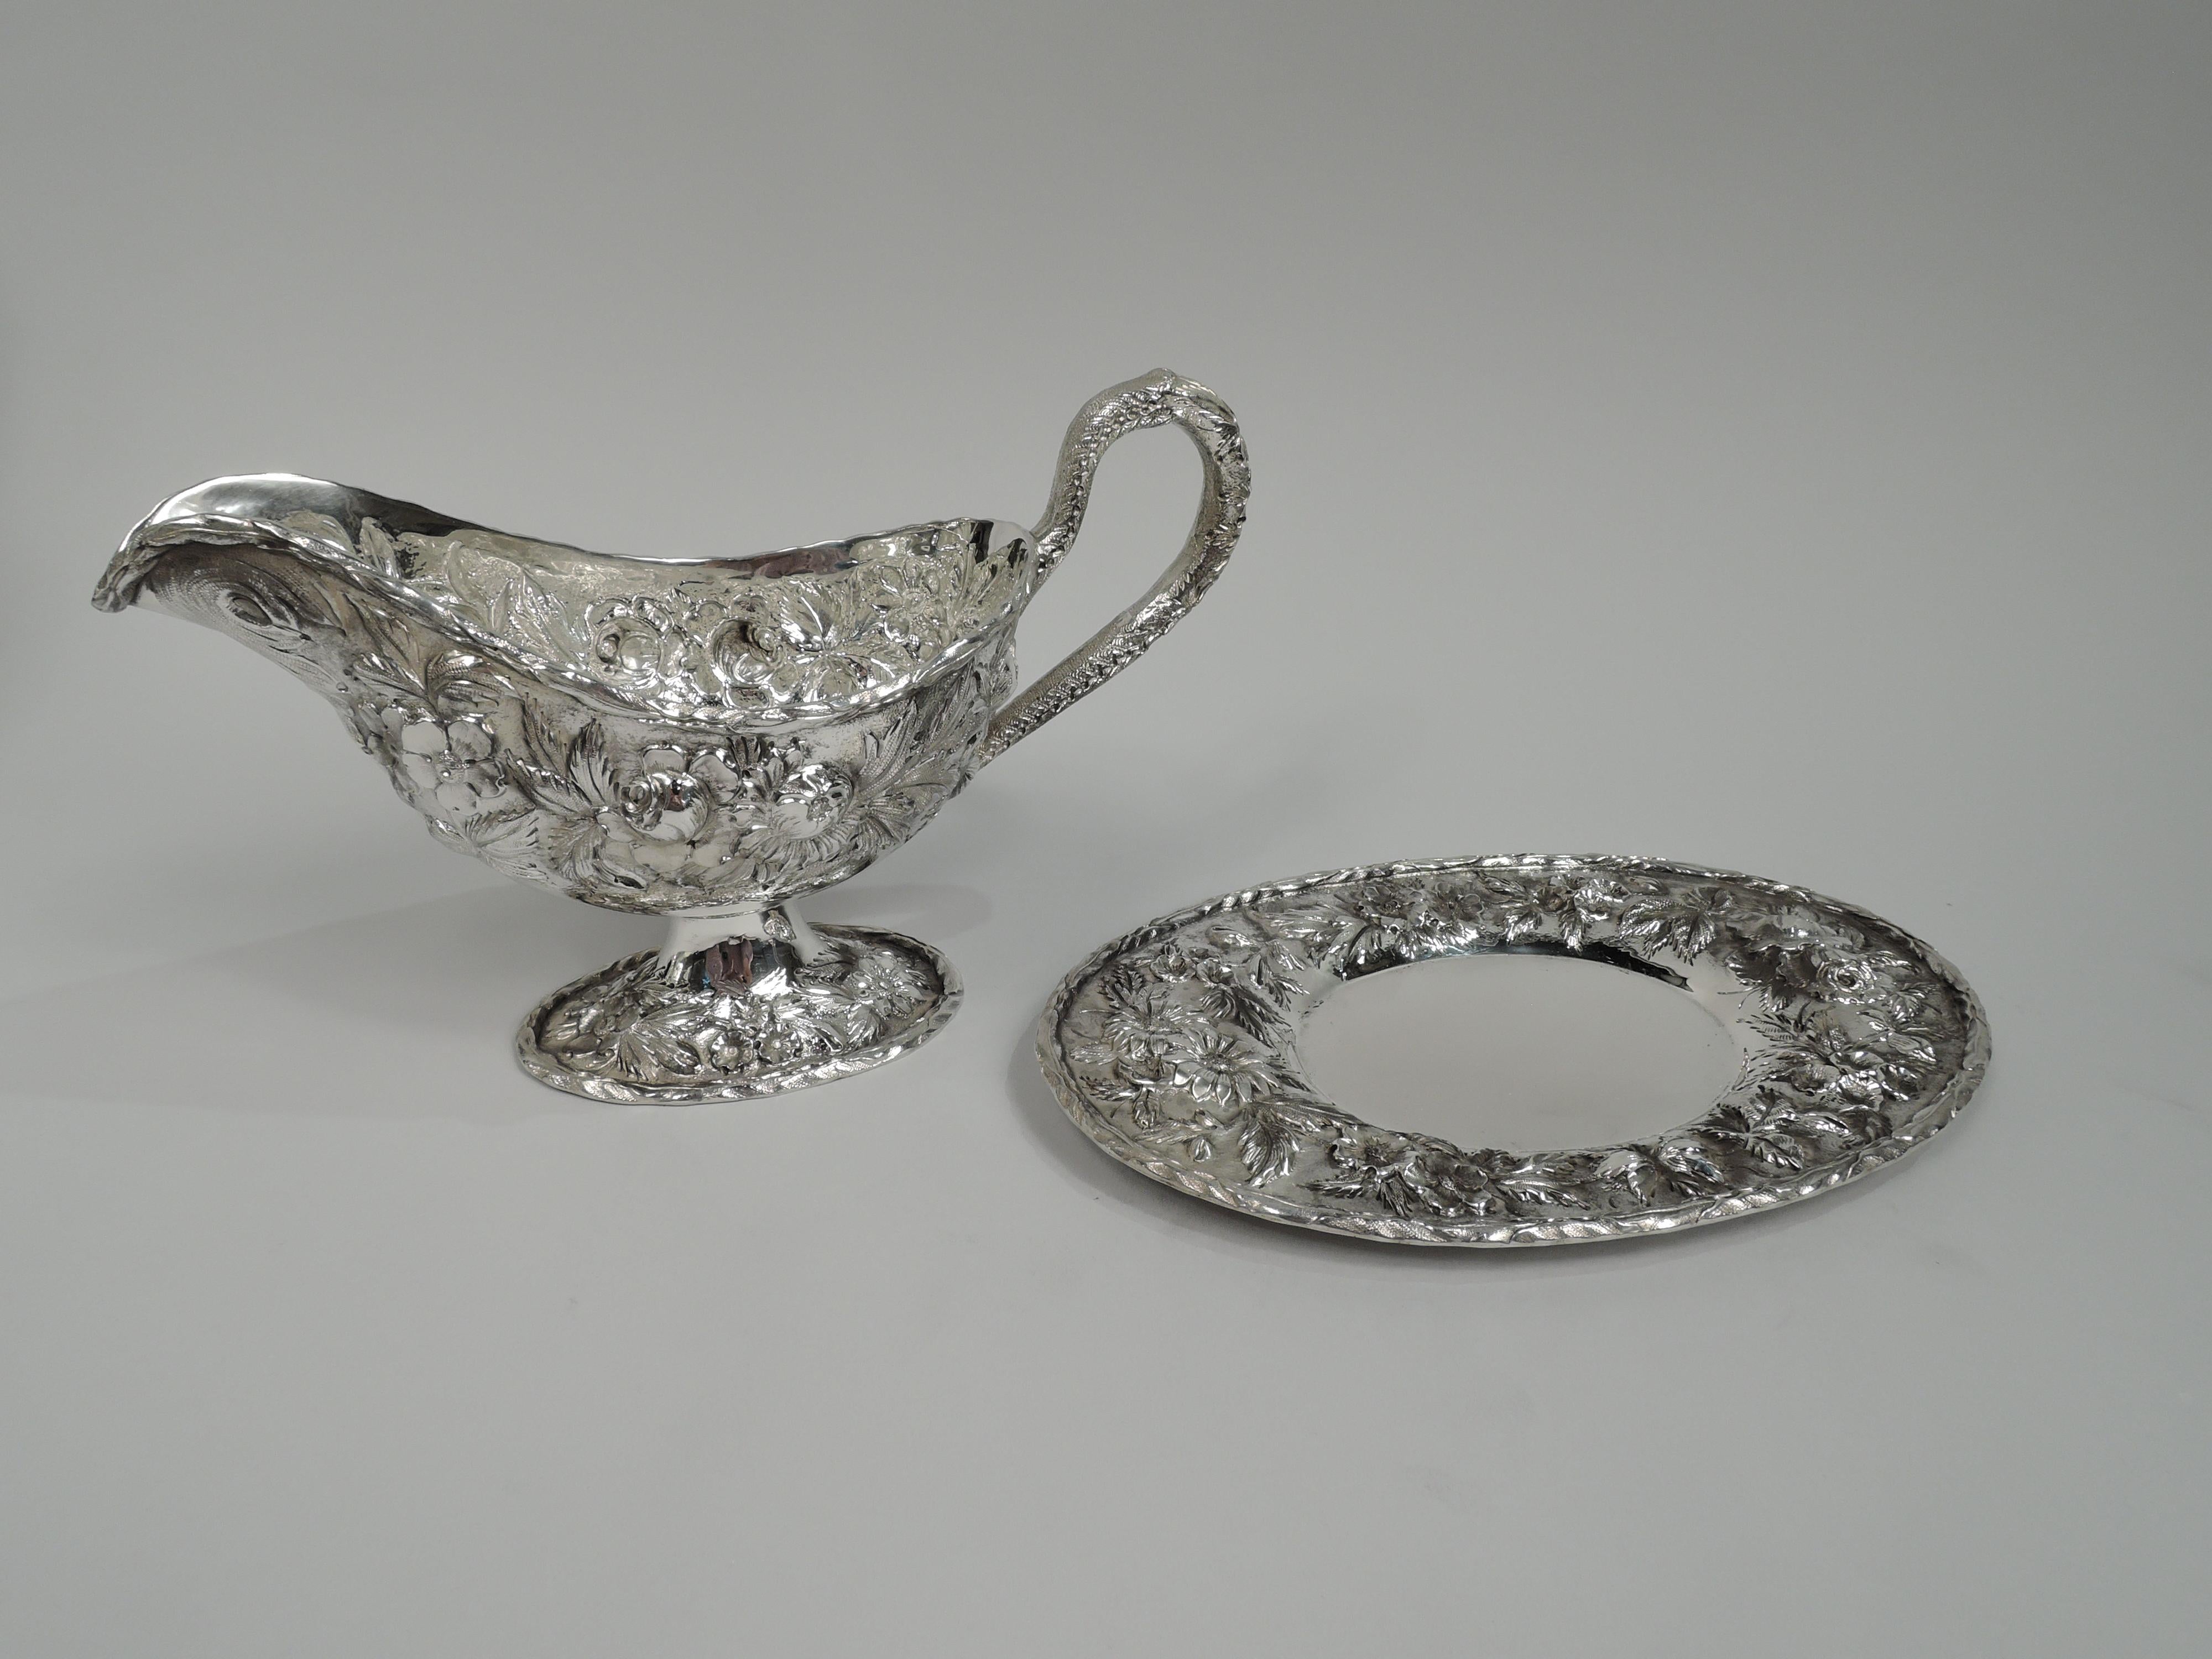 Pretty Edwardian sterling silver gravy boat on stand. Made by S. Kirk & Son Inc. in Baltimore. Boat: Traditional form with high-looping leaf-wrapped handle and raised oval foot. Stand: Plain oval well and wide shoulder. Repousse floral garlands and